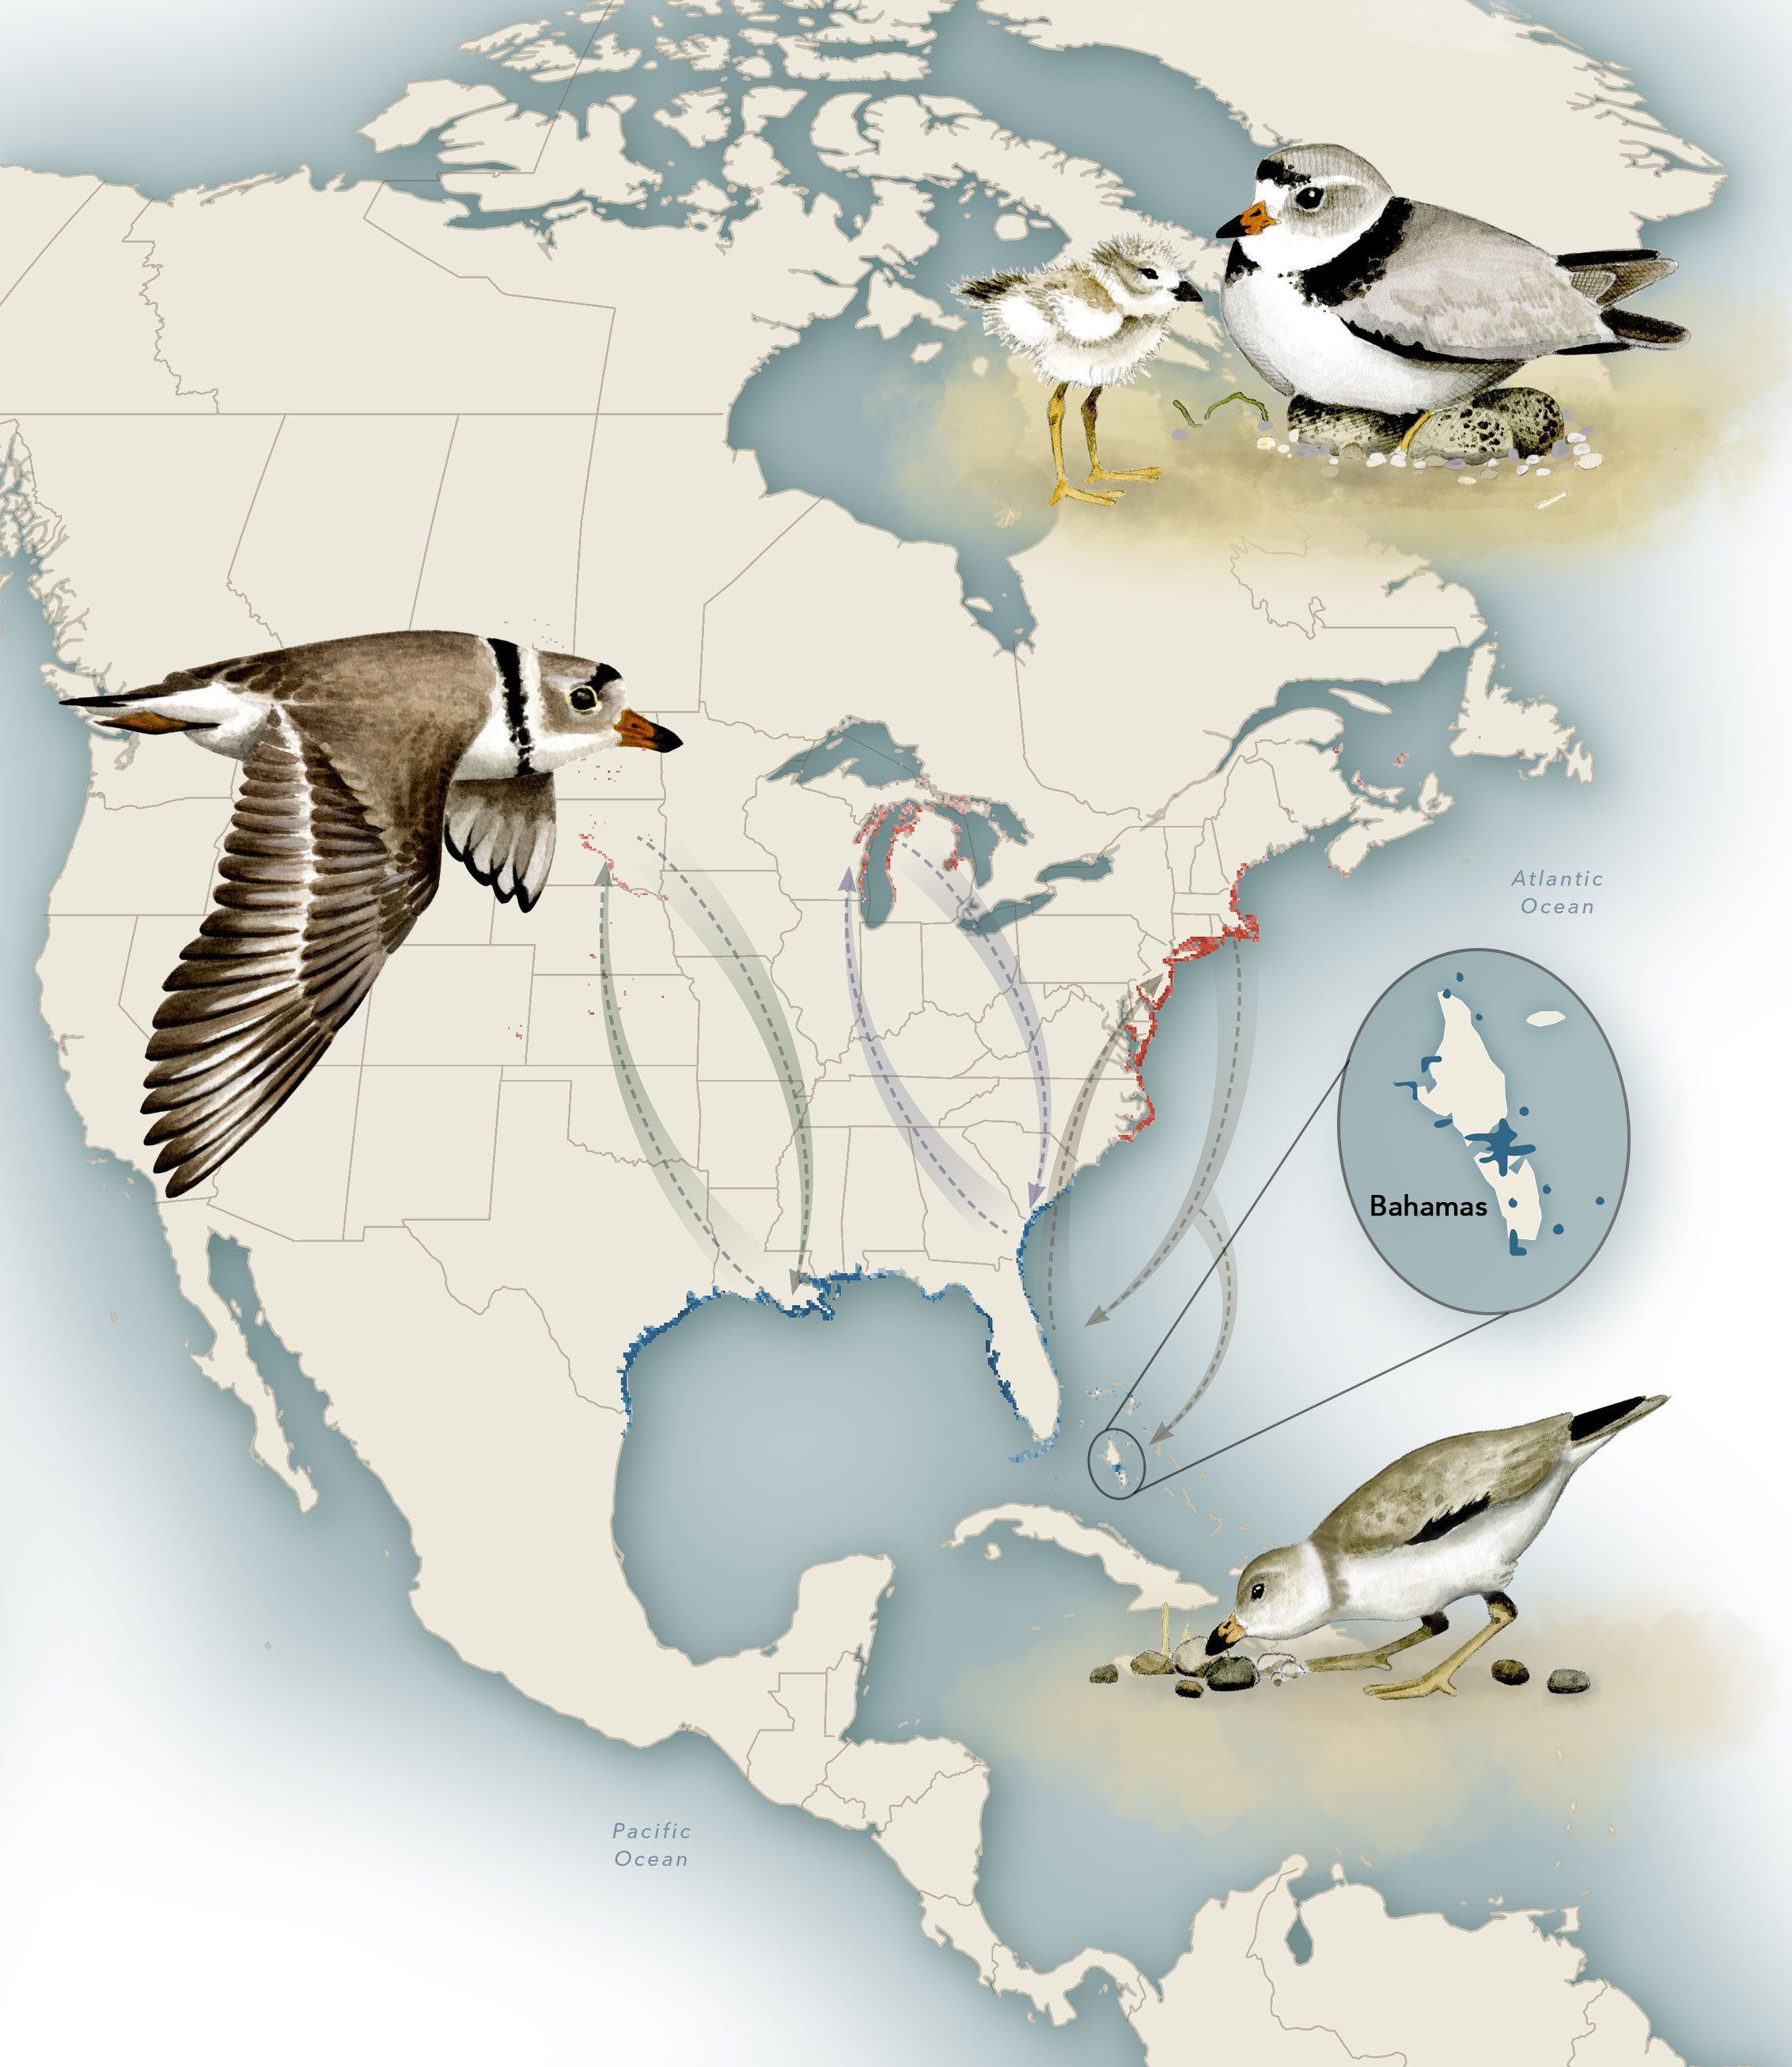 Piping Plover migration. Top to bottom: female with young, a male flying in breeding plumage, and a male foraging in winter plumage. Illustration by Bartels Science Illustrator Megan Bishop.